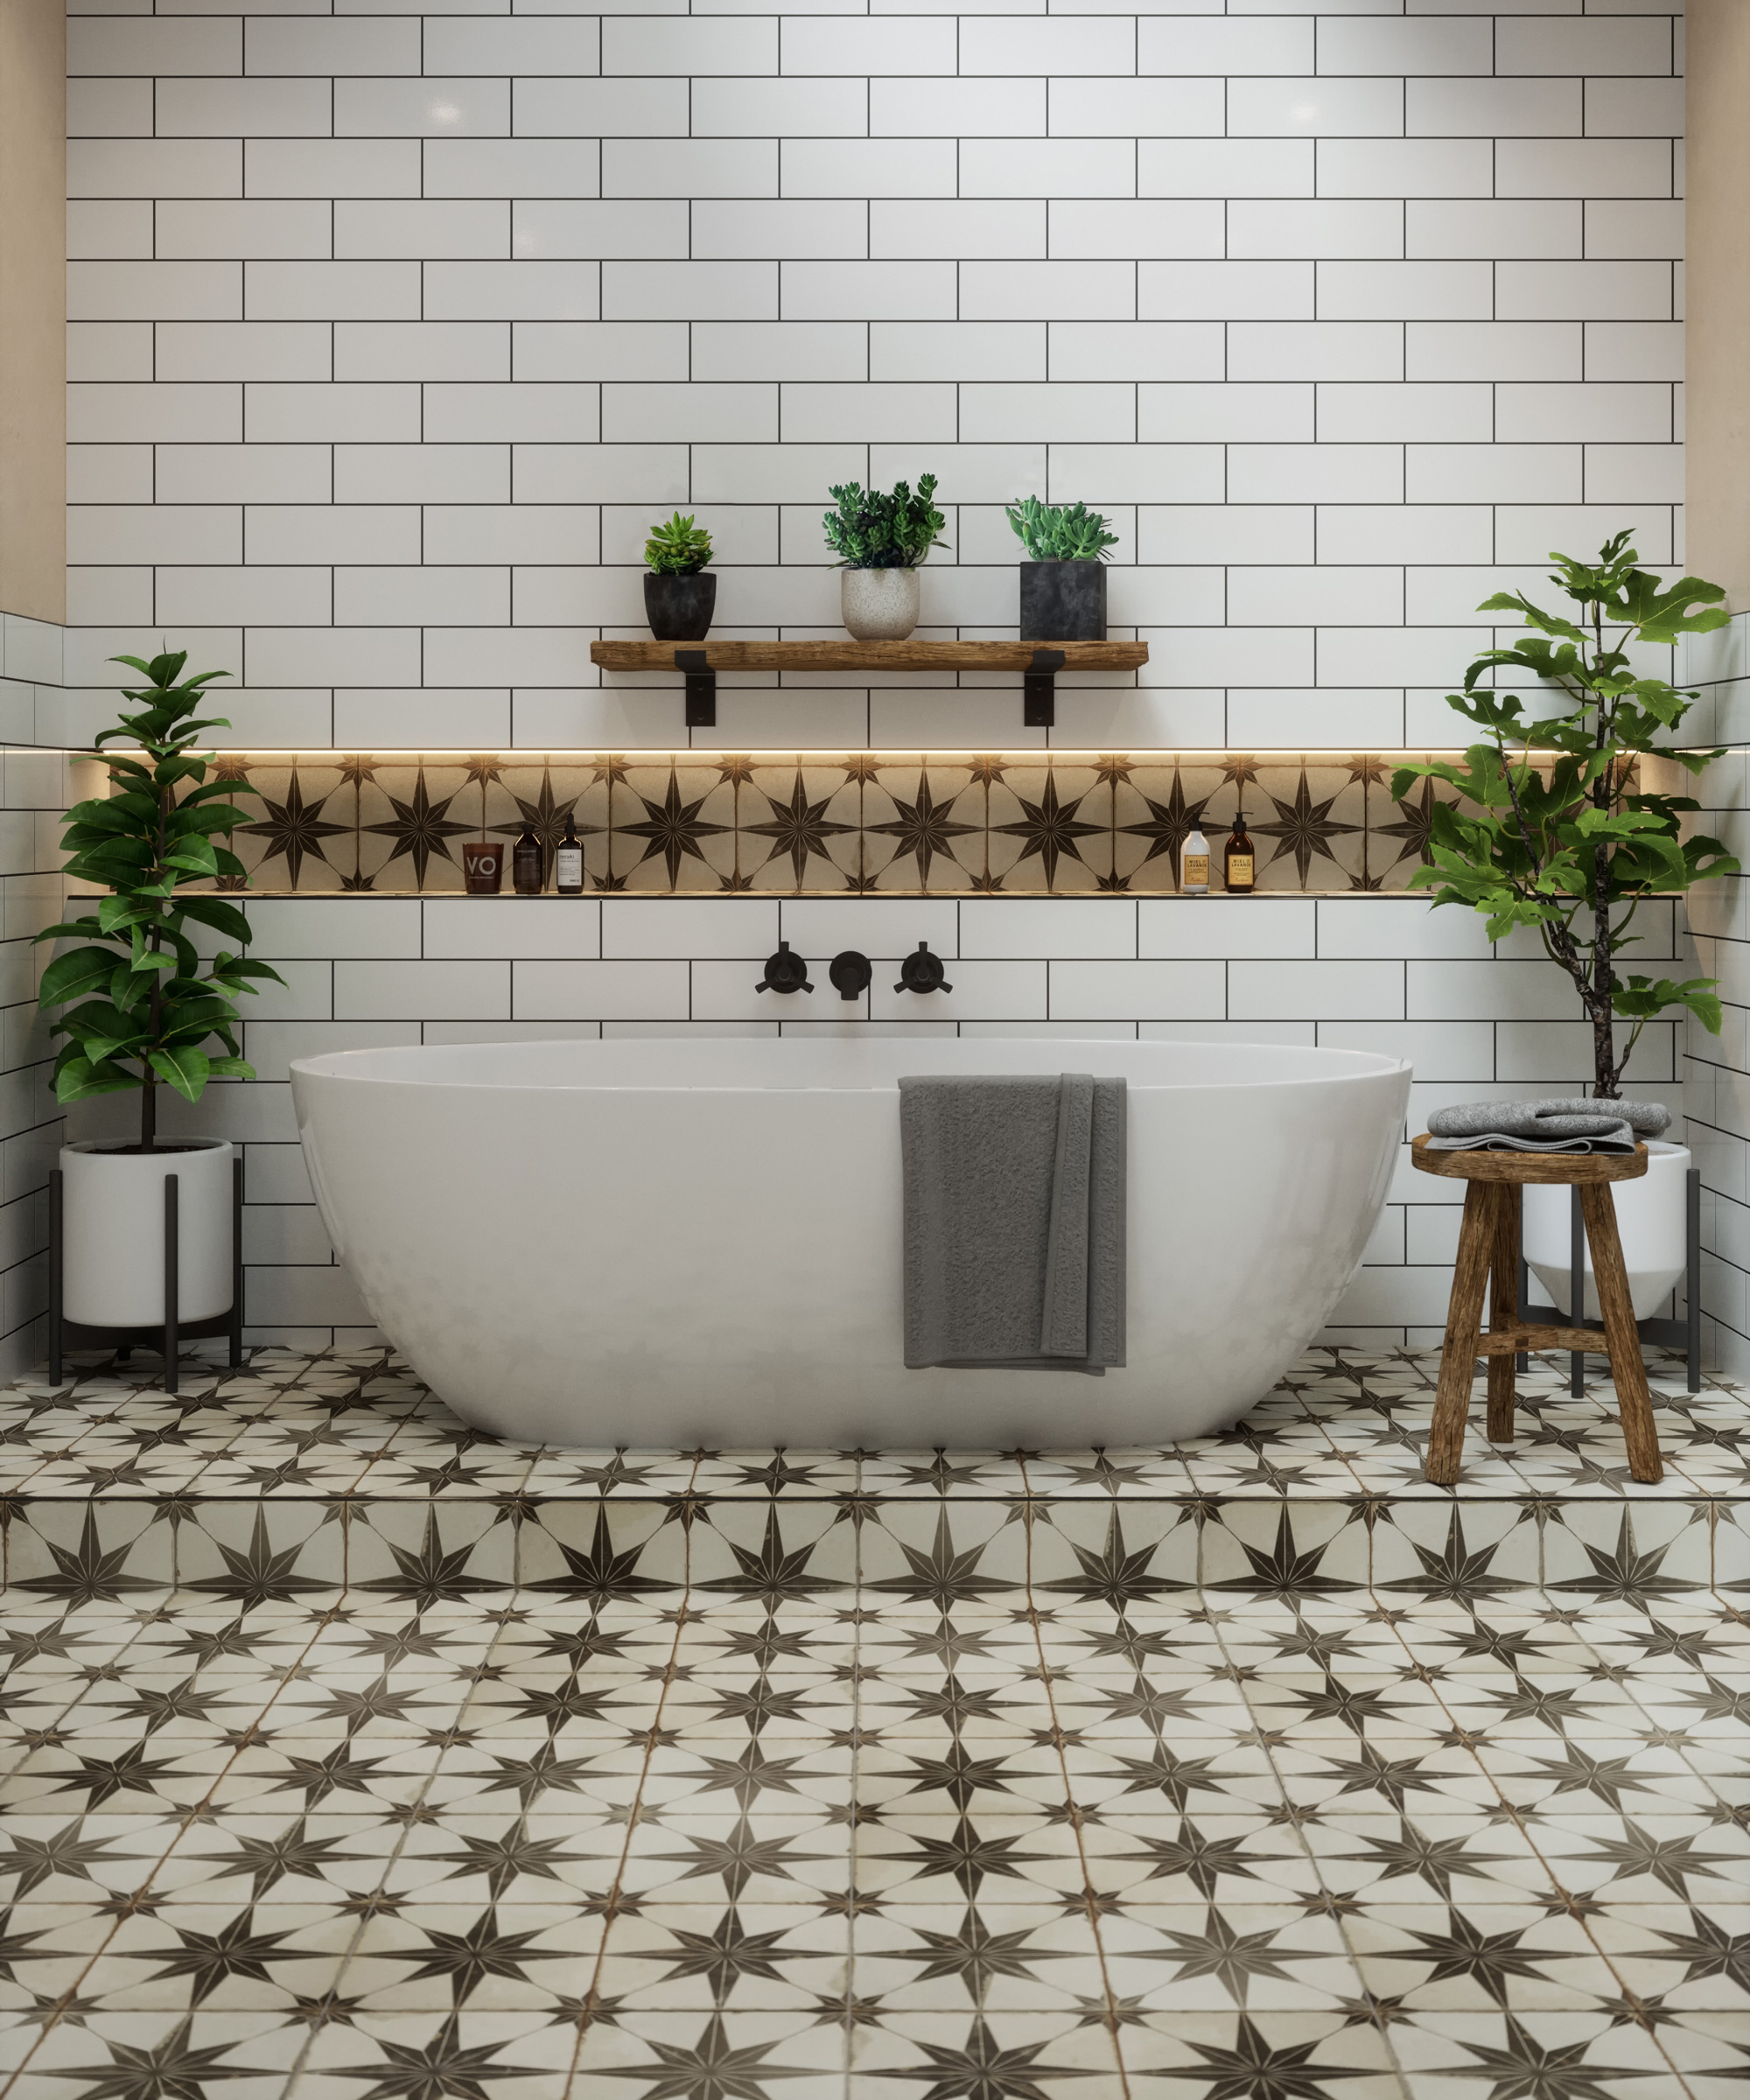 Bathroom Tile Ideas 32 New Looks To, Tile Walls In Bathroom Or Not